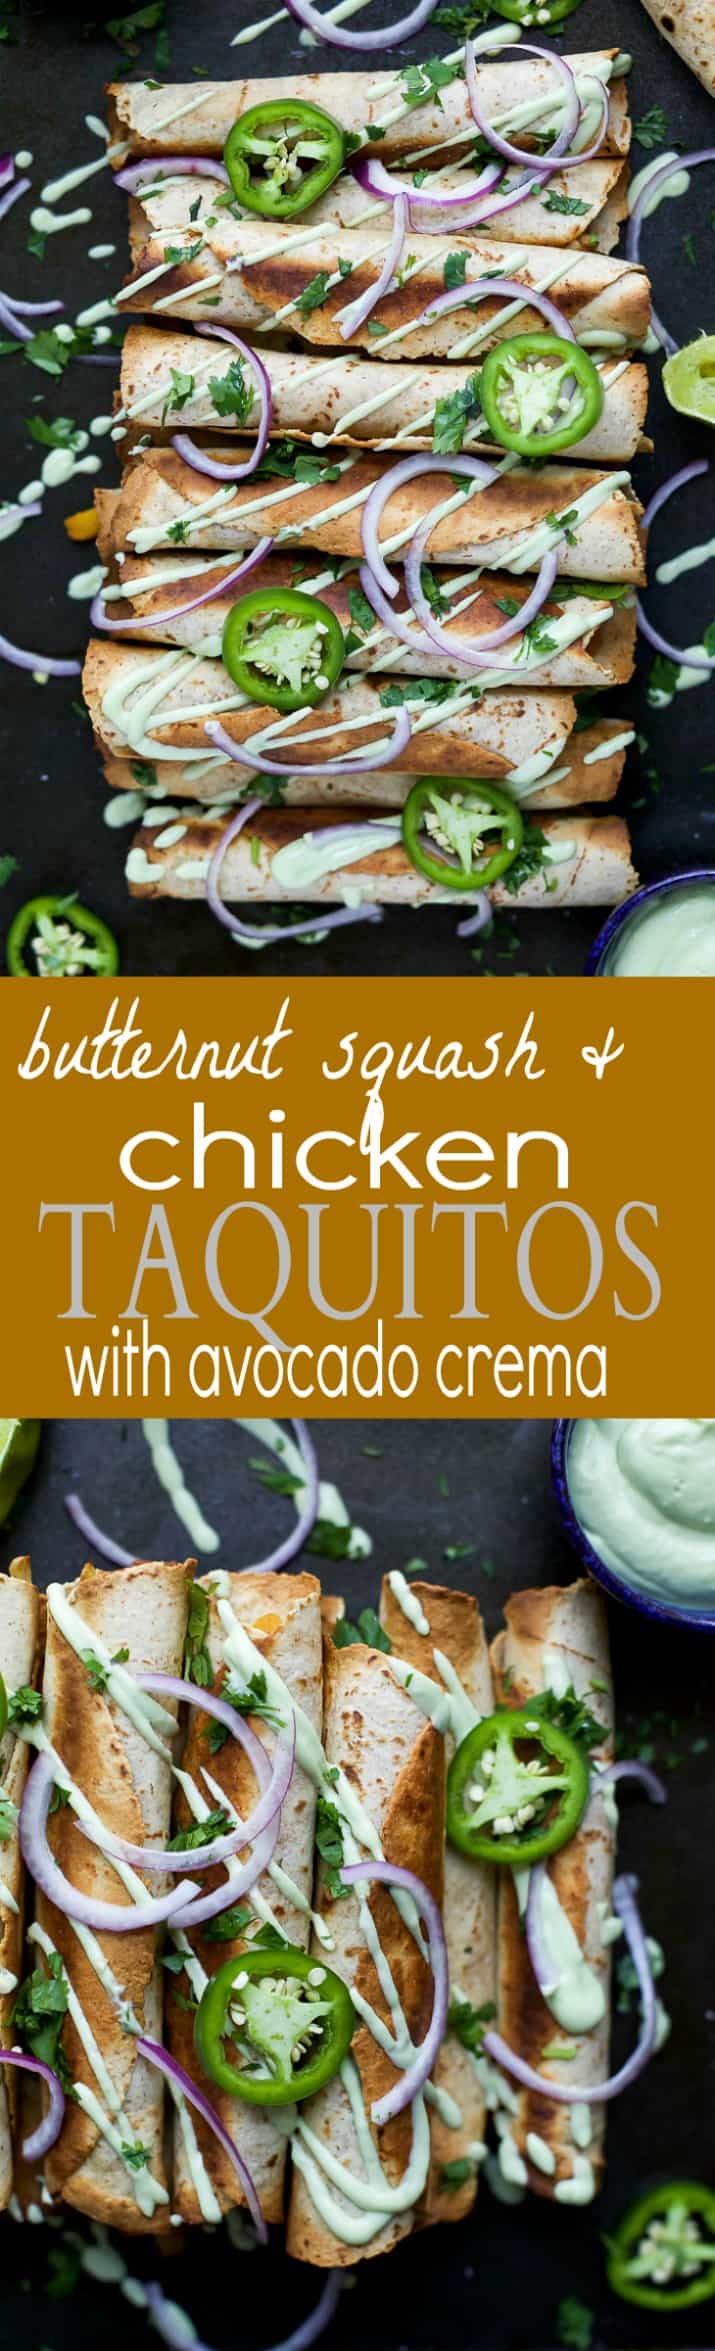 Cheesy Butternut Squash Chicken Taquitos drizzled with an Avocado Crema and garnished with sliced jalapeno and red onion with recipe title text for Butternut Squash and Chicken Taquitos with Avocado Crema